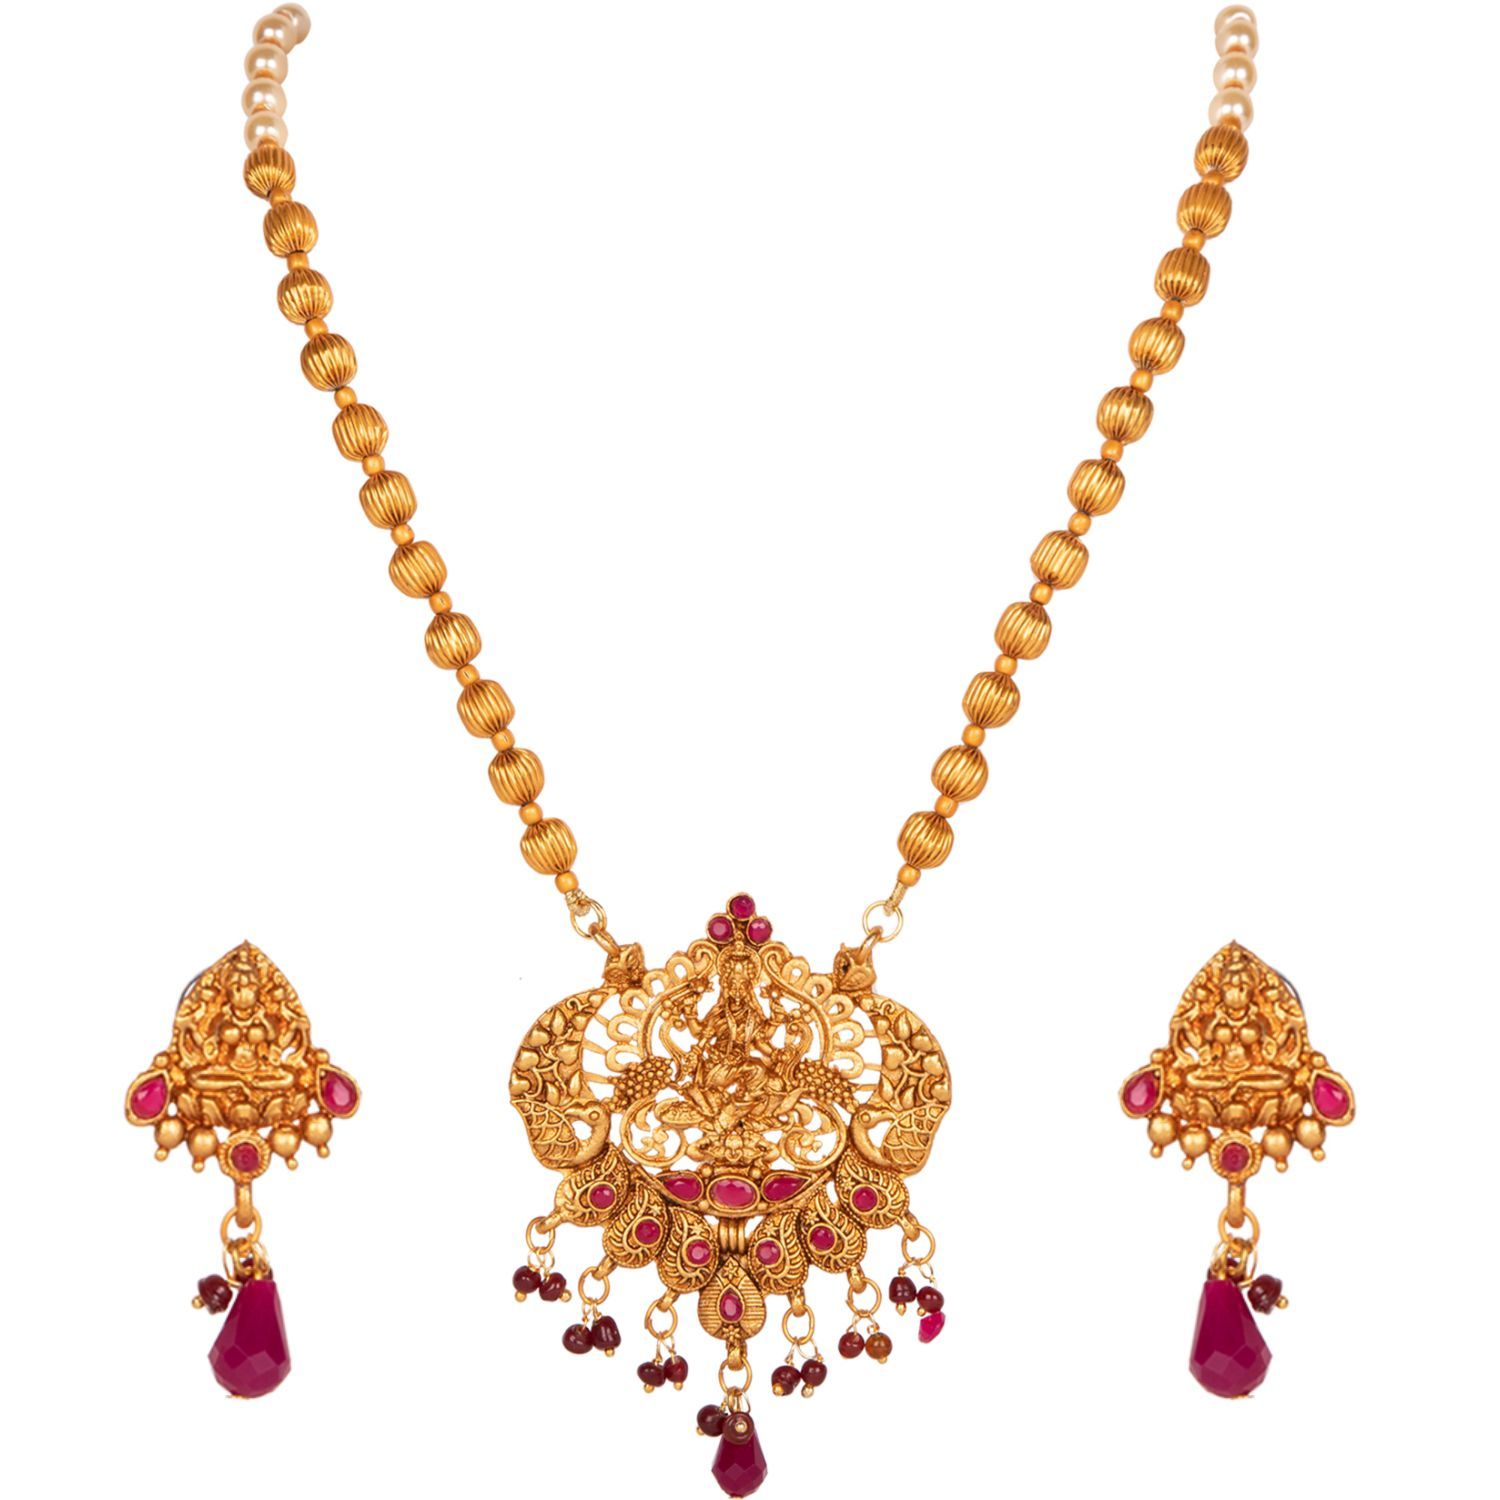 Anika S Creation Exclusive South Indian High Gold Plated Temple Jewellery Set Design Of Lord Lakshmi Buy Anika S Creation Exclusive South Indian High Gold Plated Temple Jewellery Set Design Of Lord Lakshmi Online,Garden Design Front Of House In Kerala